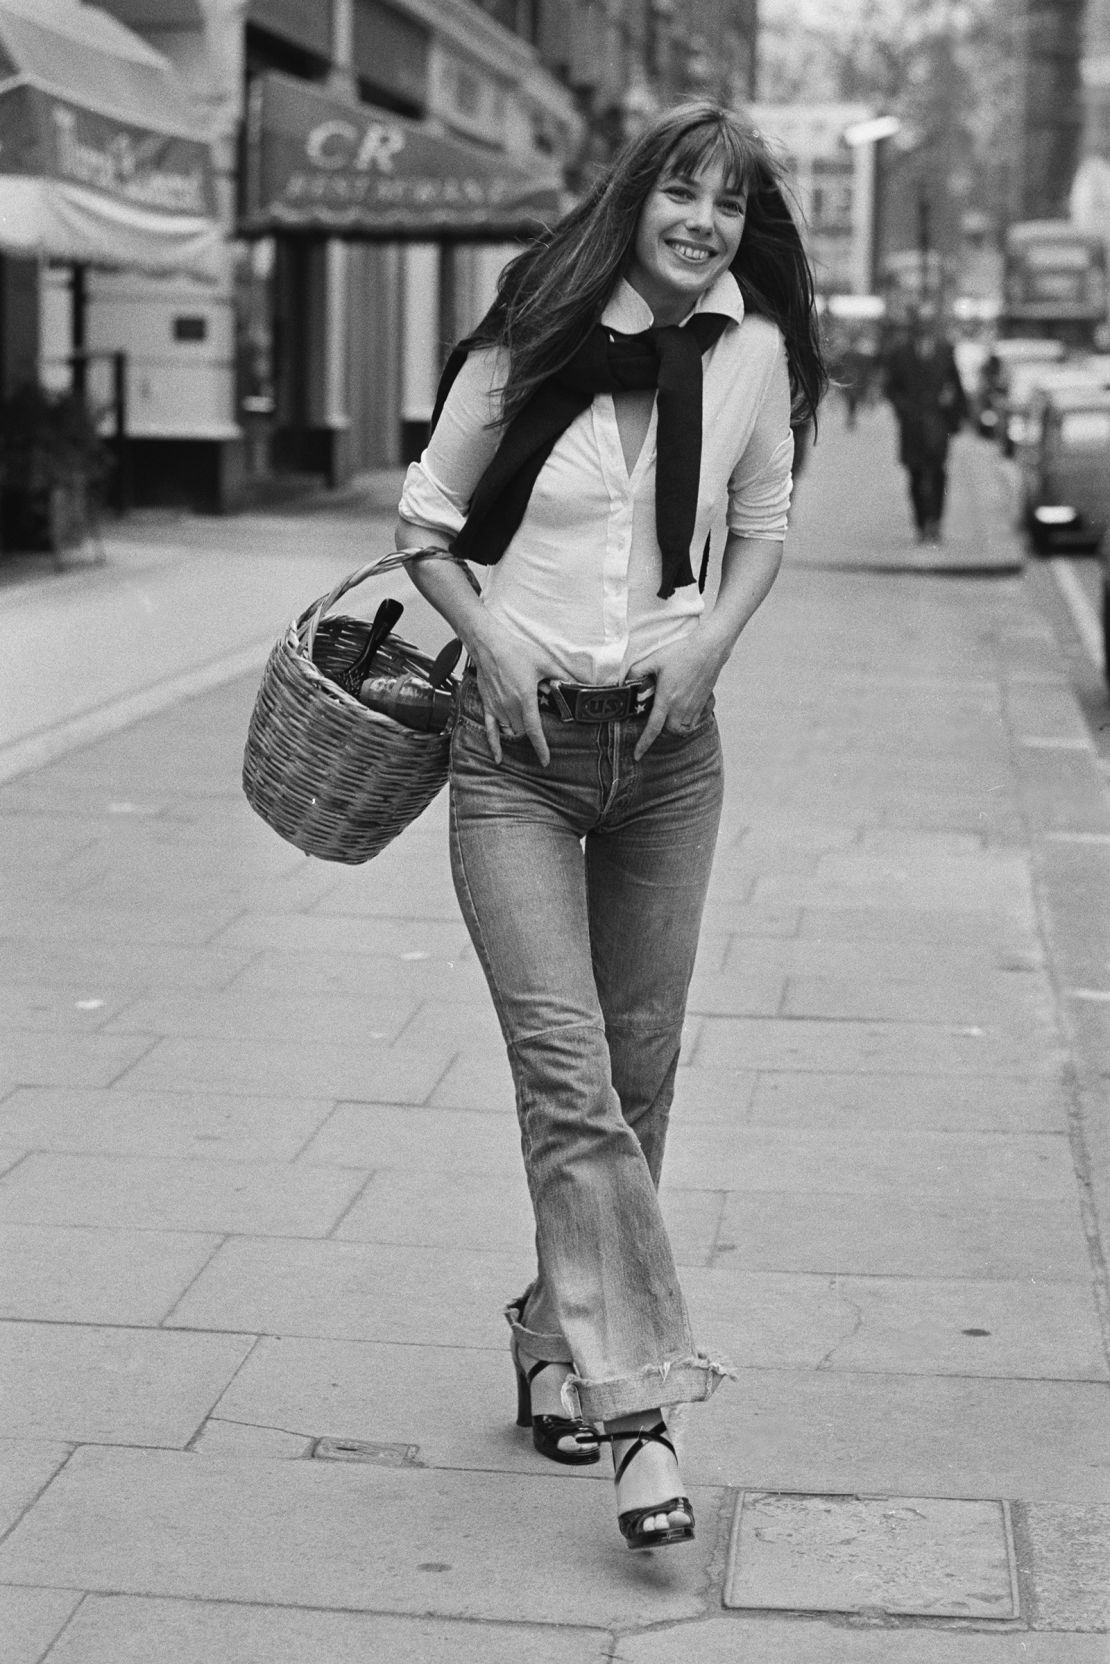 British actress and singer Jane Birkin wearing a white shirt with the sleeves rolled up, and the sleeves of a sweater tied around her neck, and a pair of jeans with her thumbs under the beltline, and a wicker basket hanging from her right arm, smiling on a street in London, England, 13th April 1973.